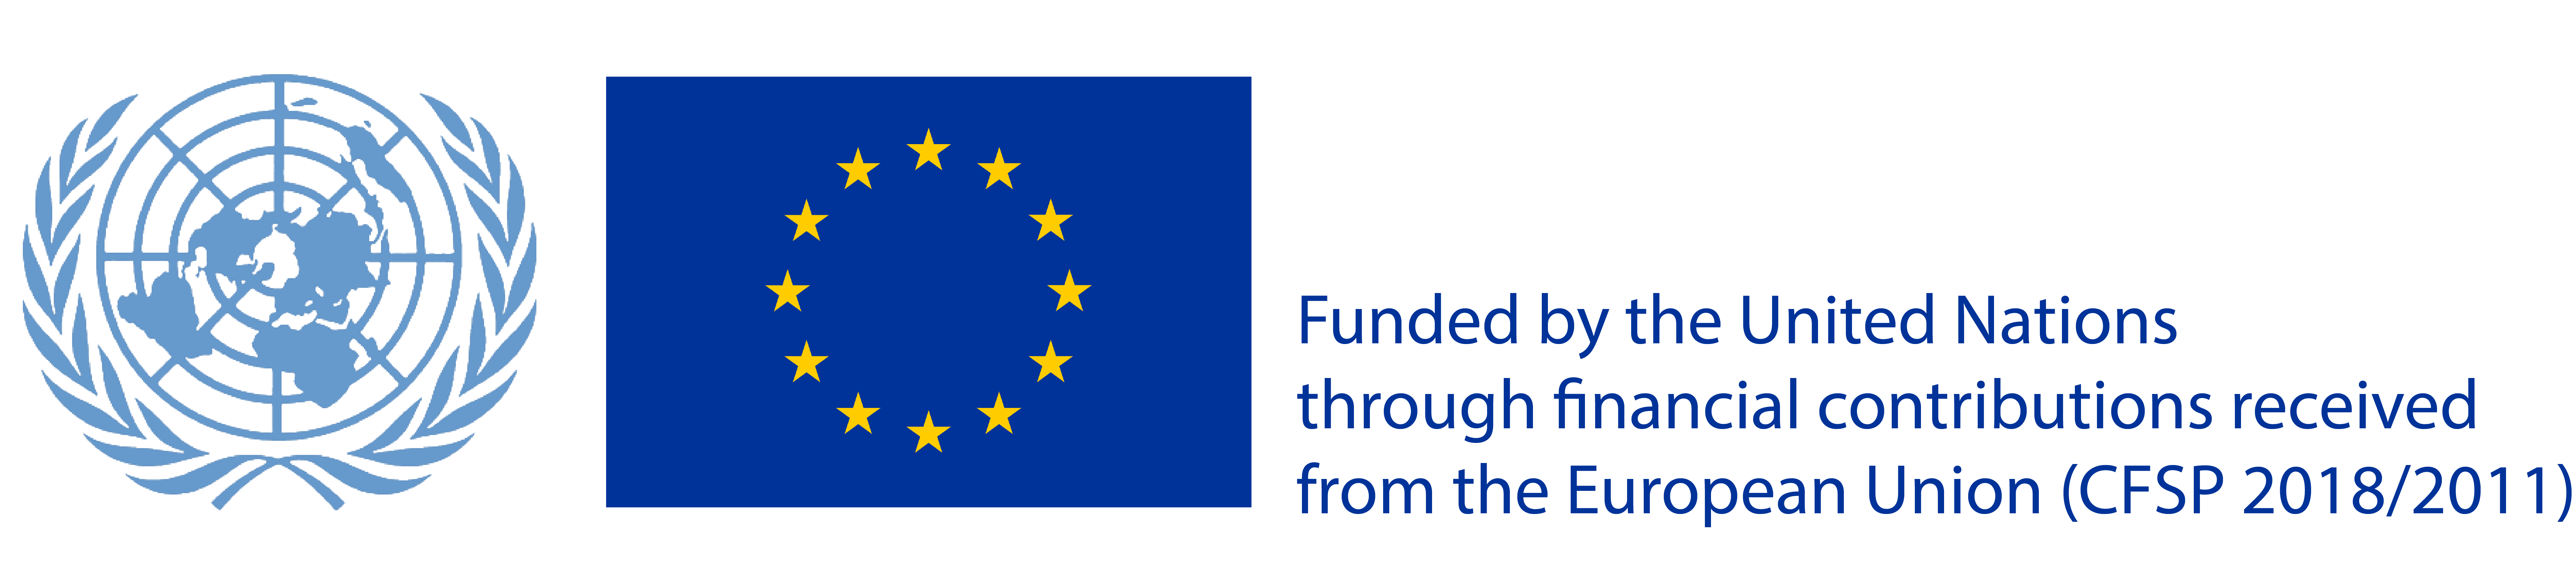 Funded by the United Nations through contributions from the European Union. 